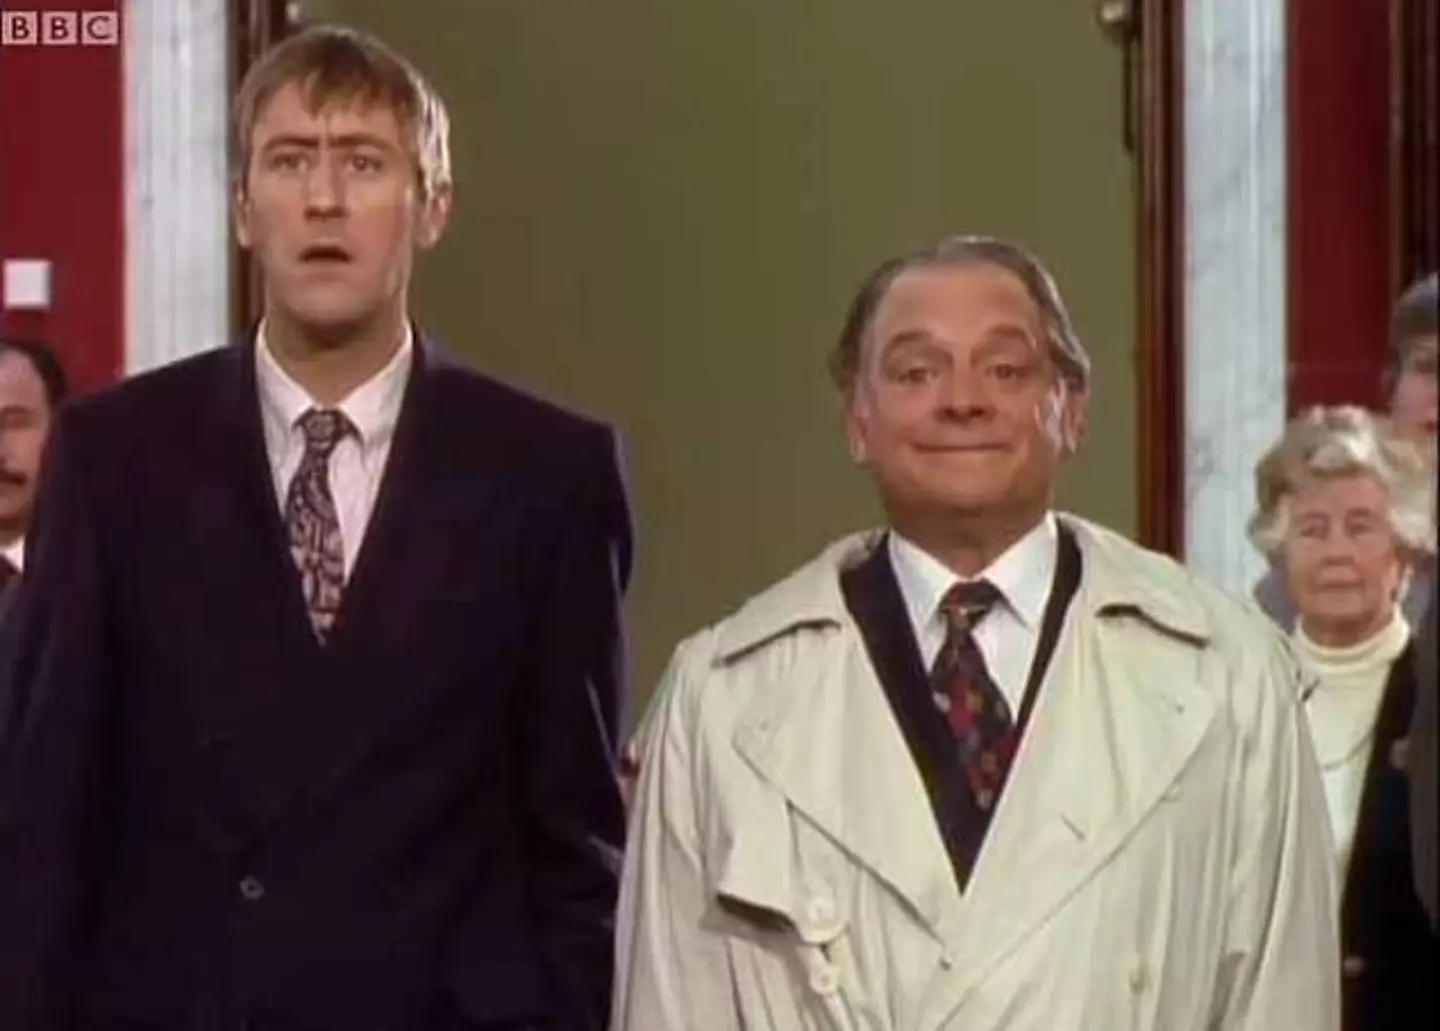 Only Fools and Horses star Sir David Jason has suggested that he no longer sees his on-screen brother Nicholas Lyndhurst.